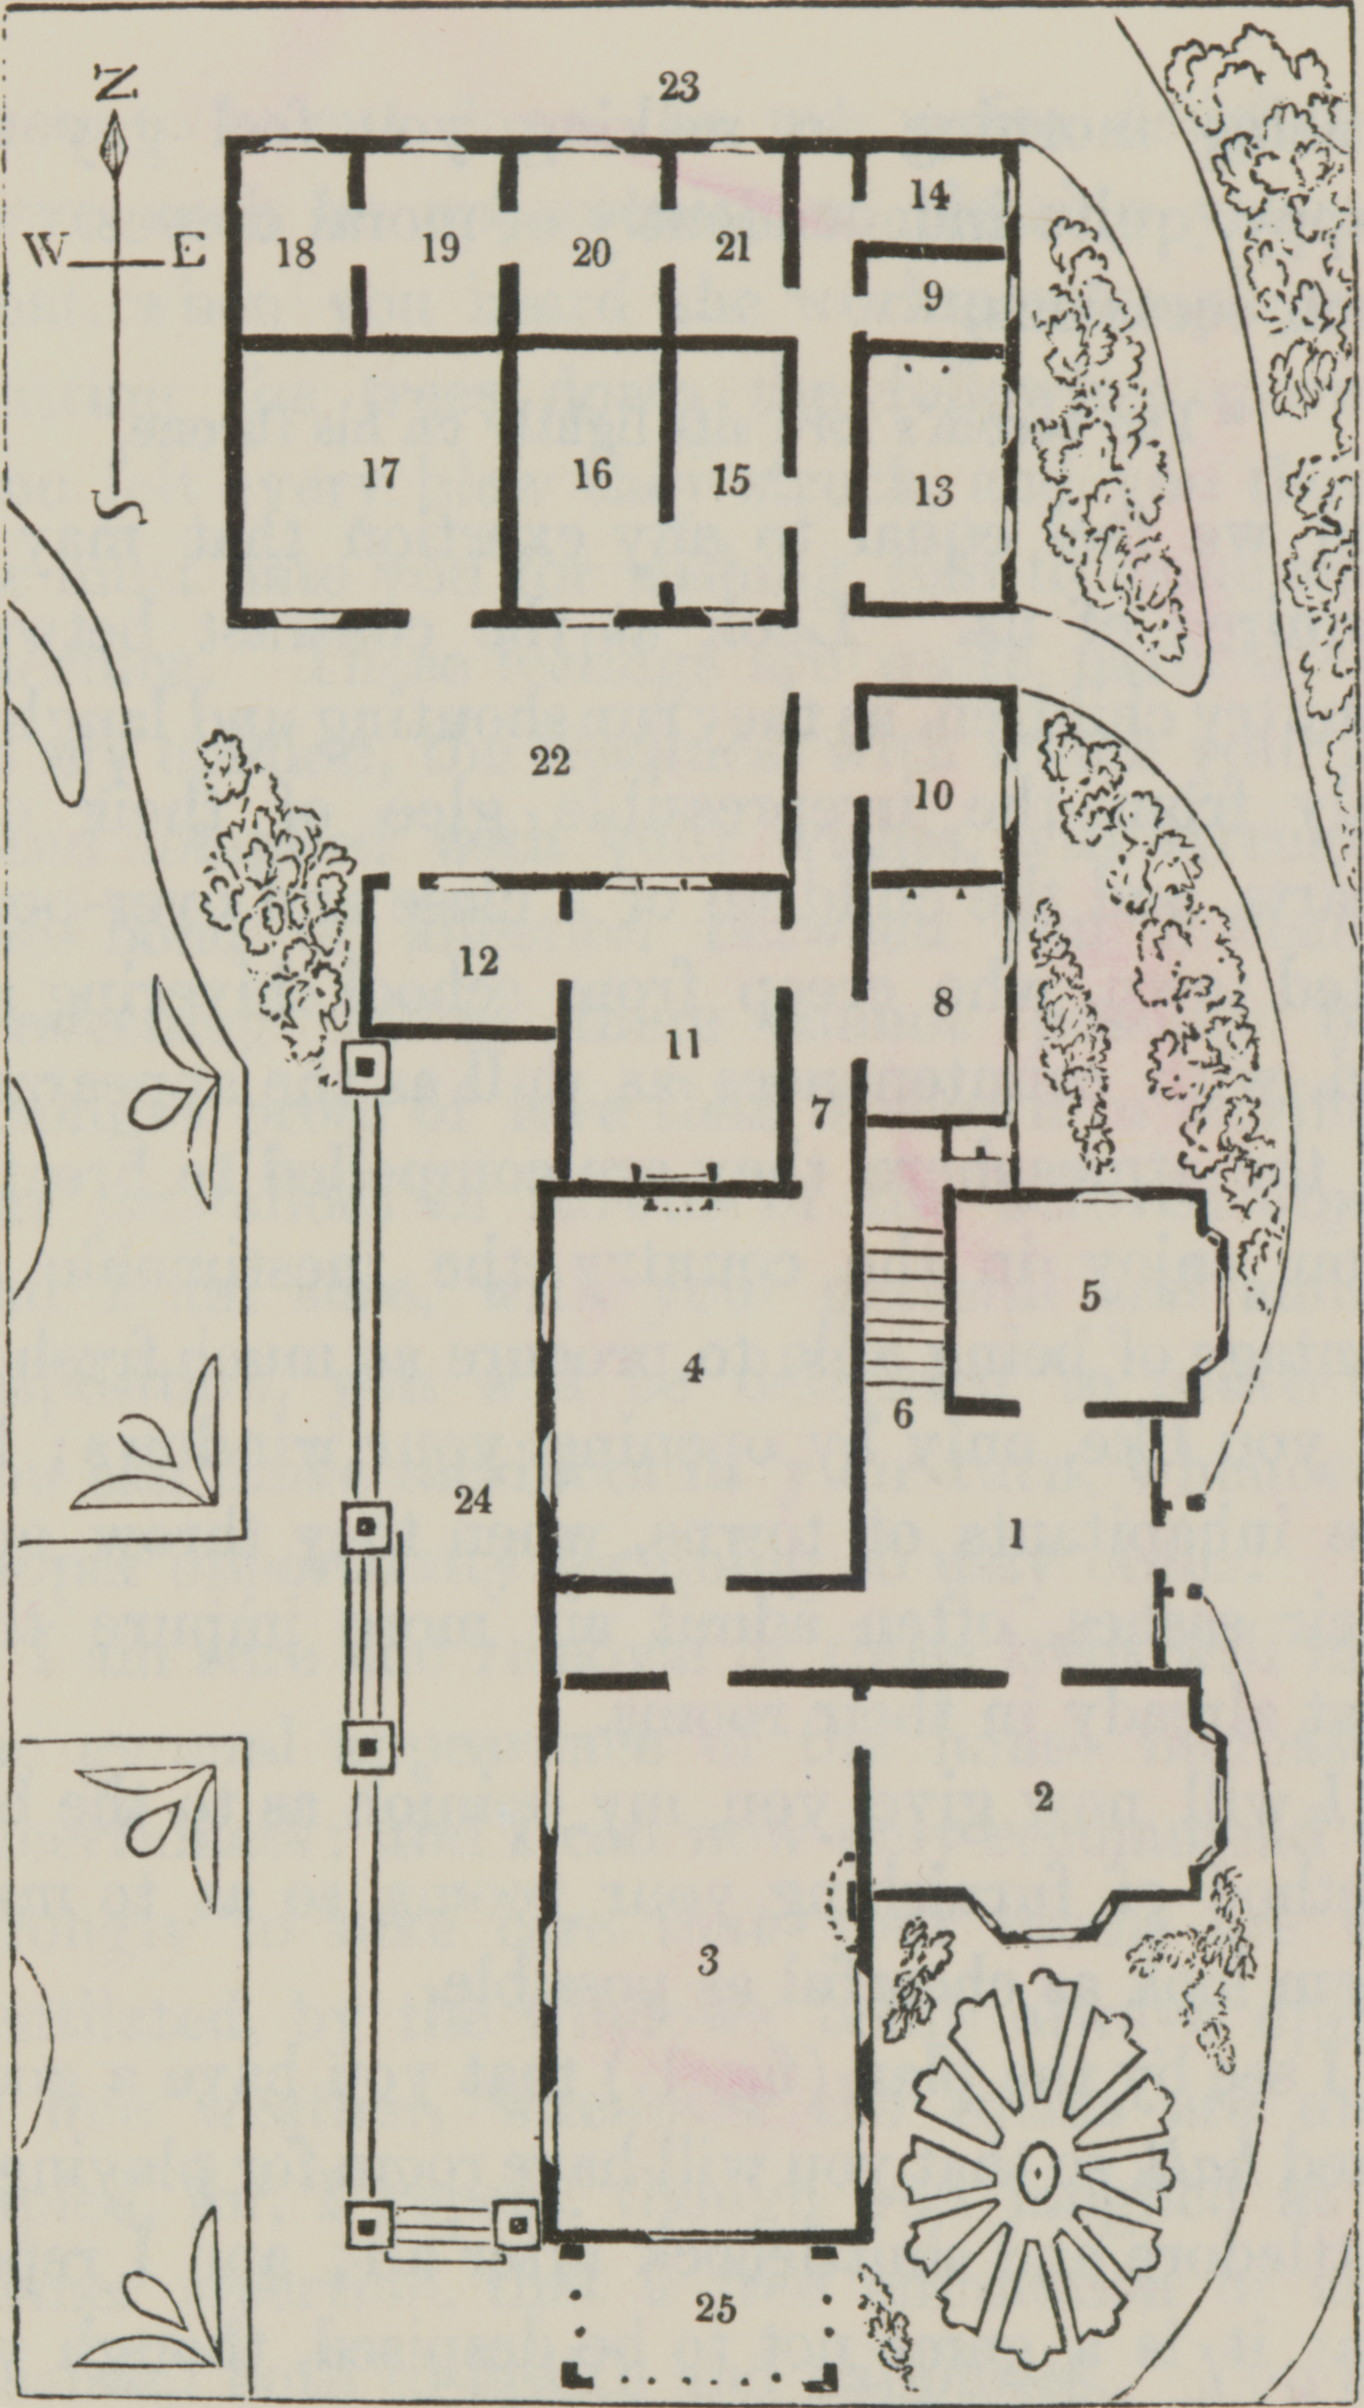 floor plan of large house with separate servants' quarters